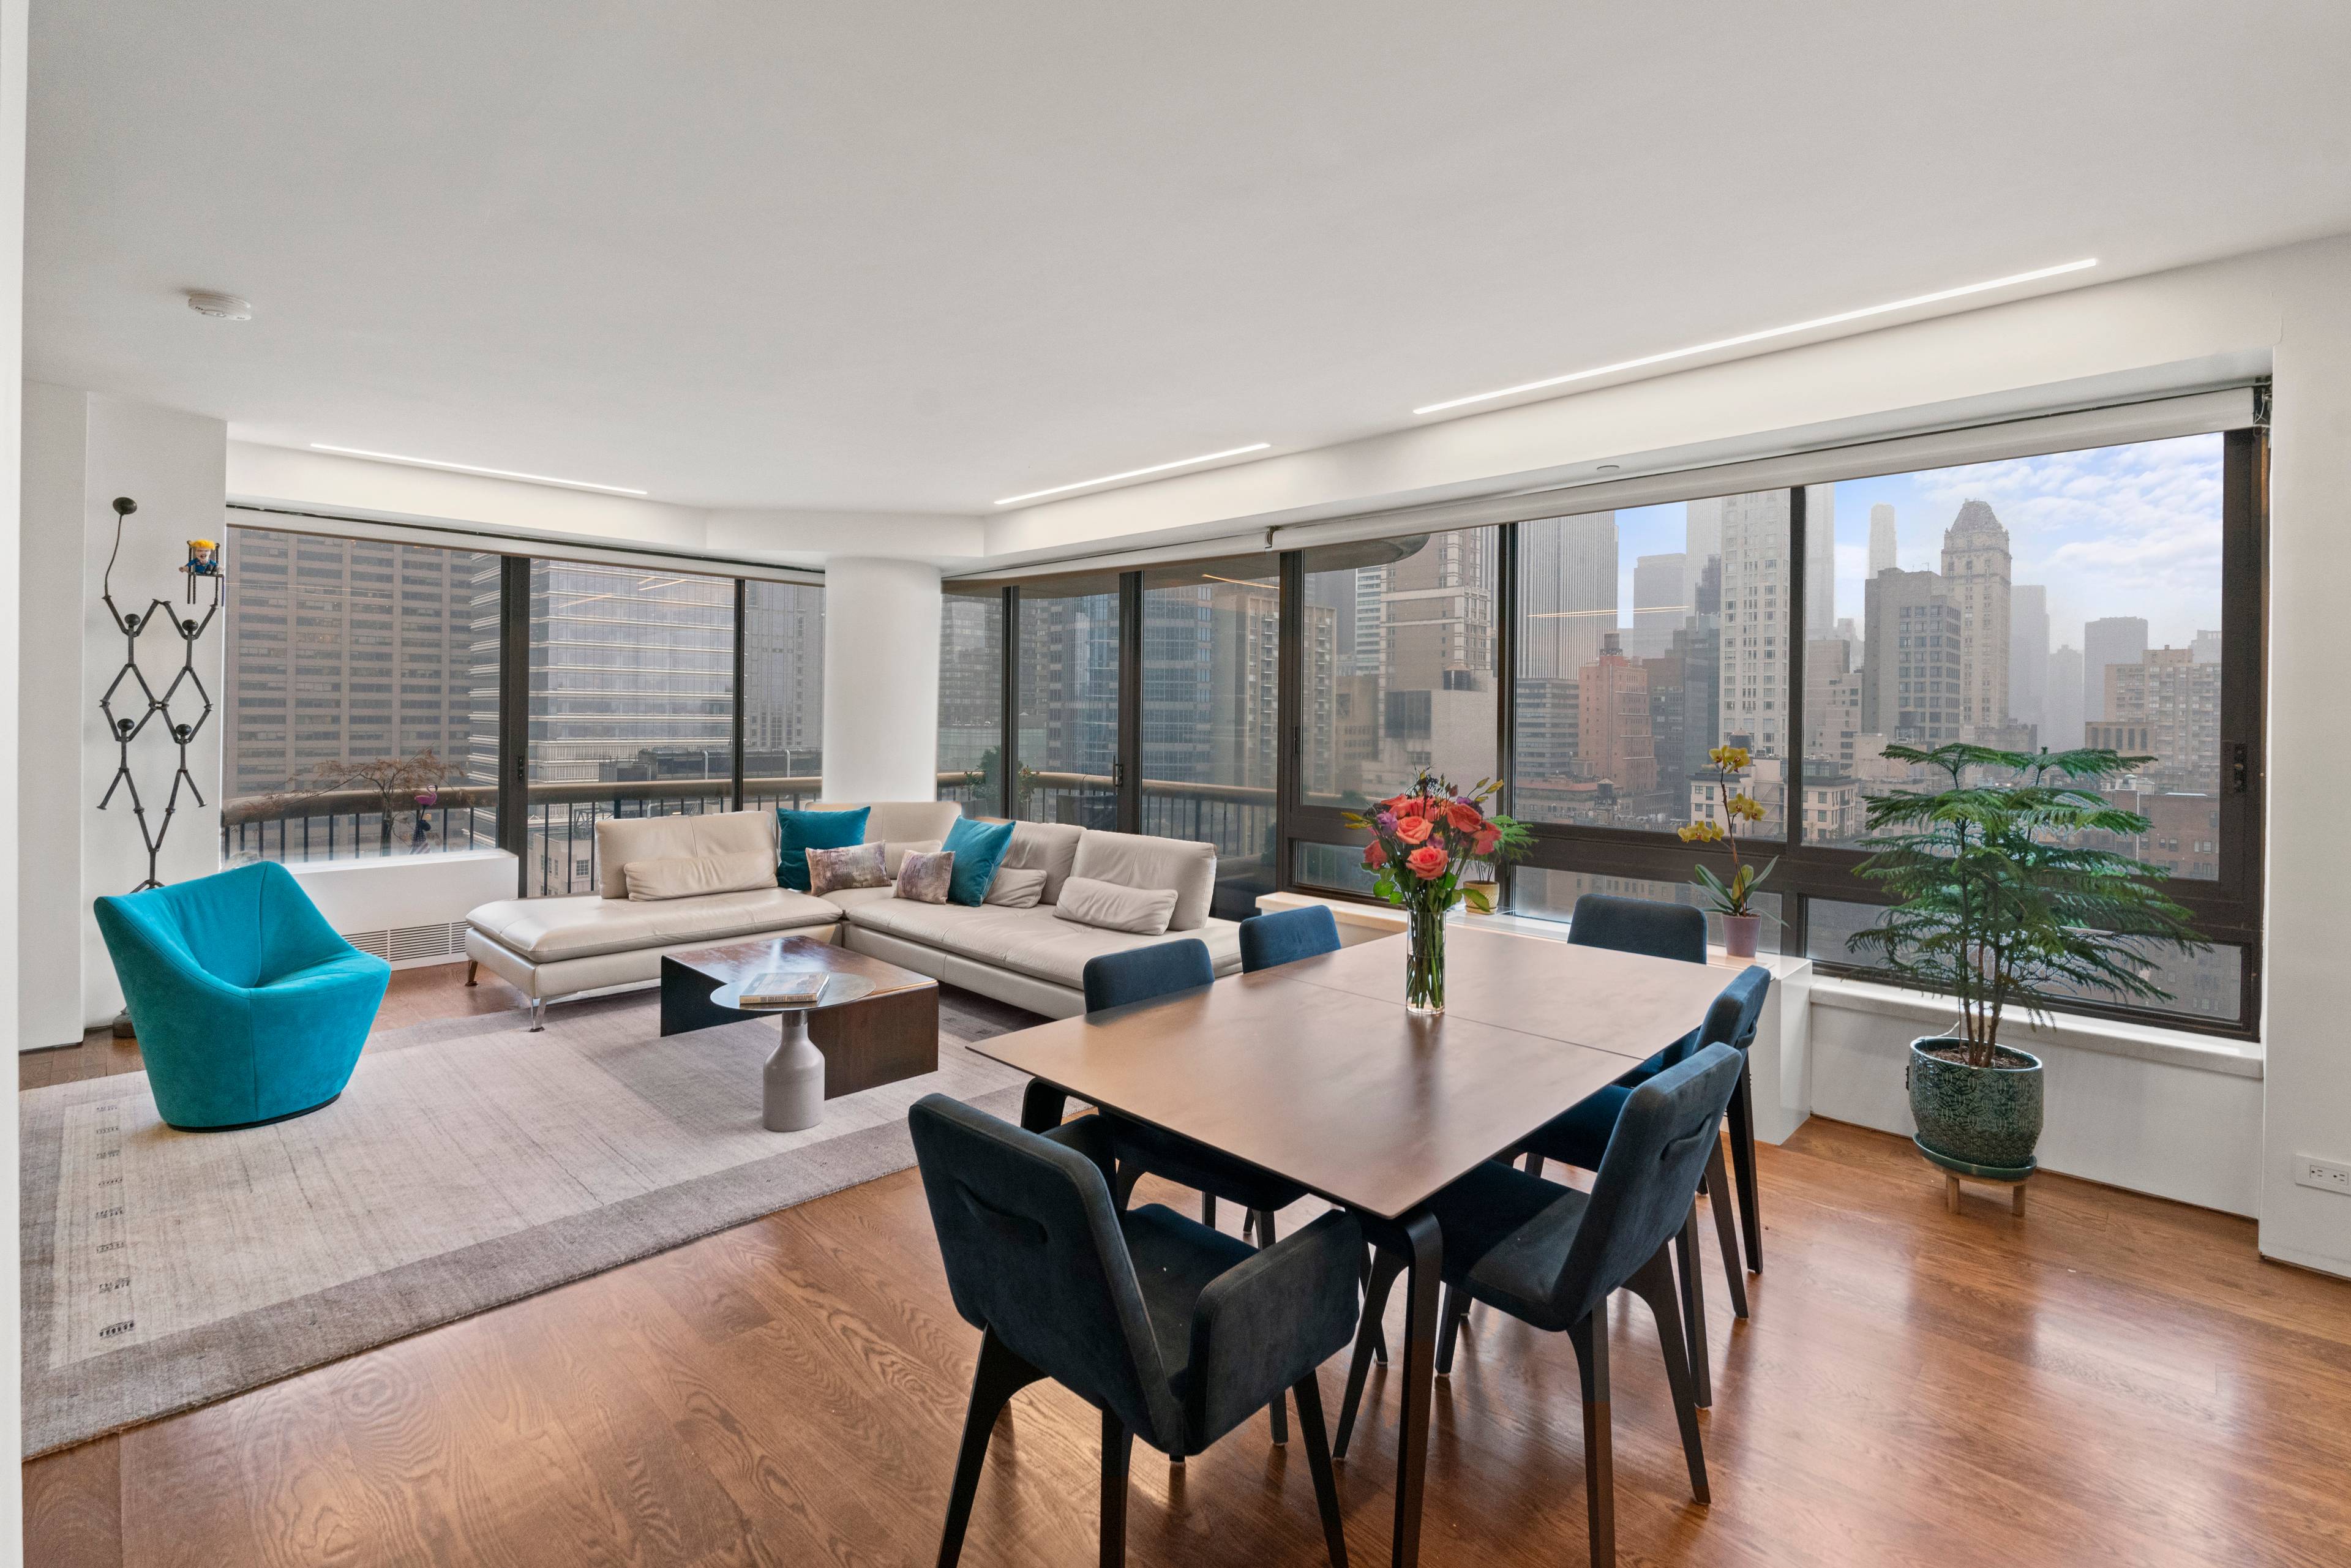 EXQUISITE UPPER EAST SIDE LUXURY APARTMENT WITH 180 DEGREE VIEWS! 167 EAST 61ST STREET, APARTMENT 24C